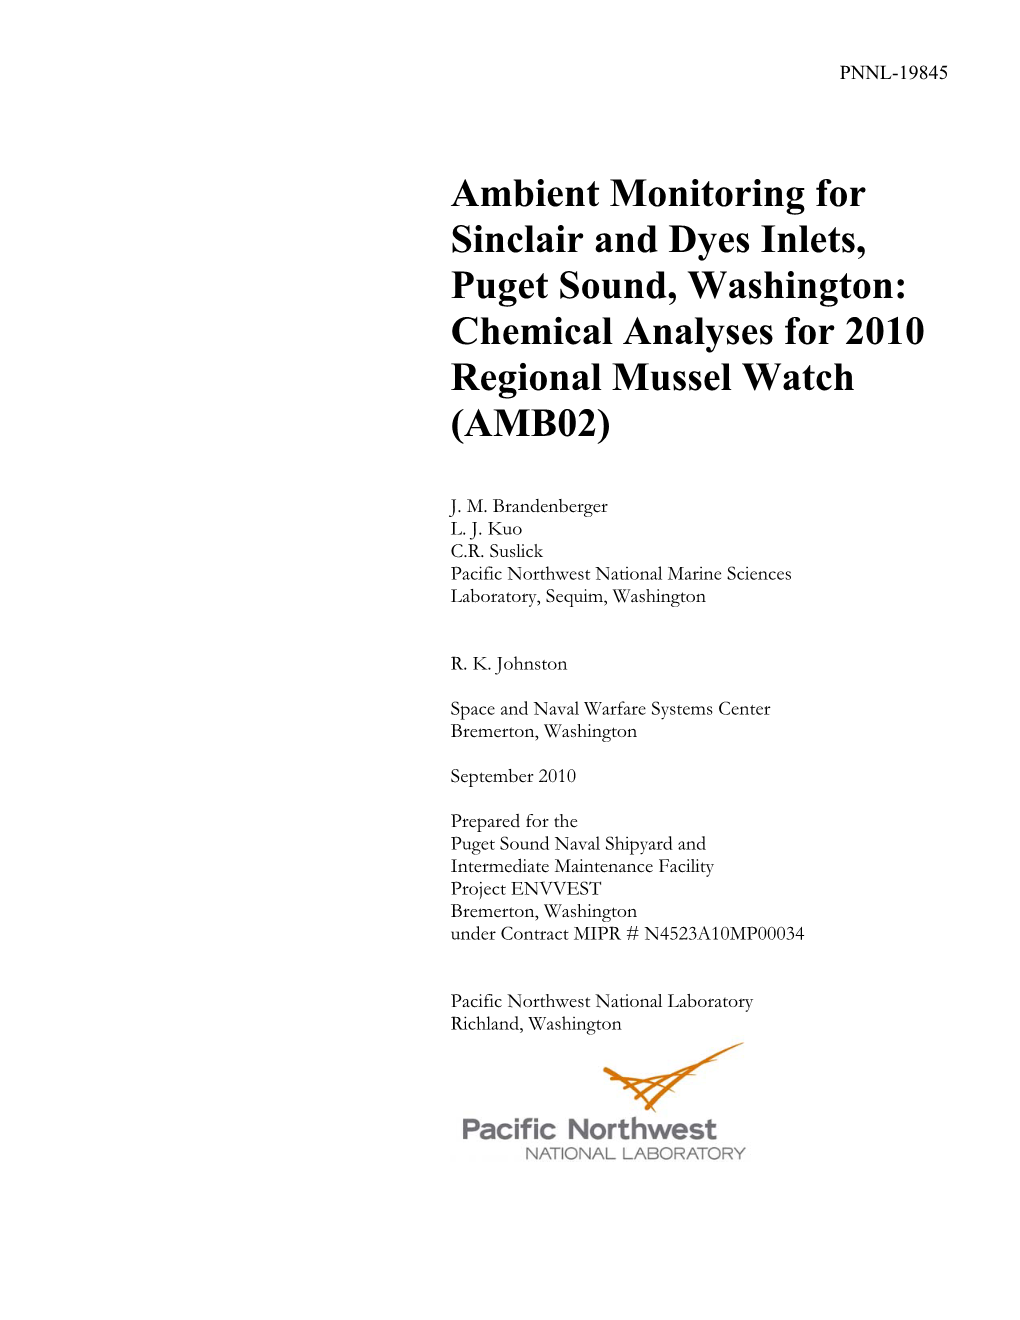 Ambient Monitoring for Sinclair and Dyes Inlets, Puget Sound, Washington: Chemical Analyses for 2010 Regional Mussel Watch (AMB02)